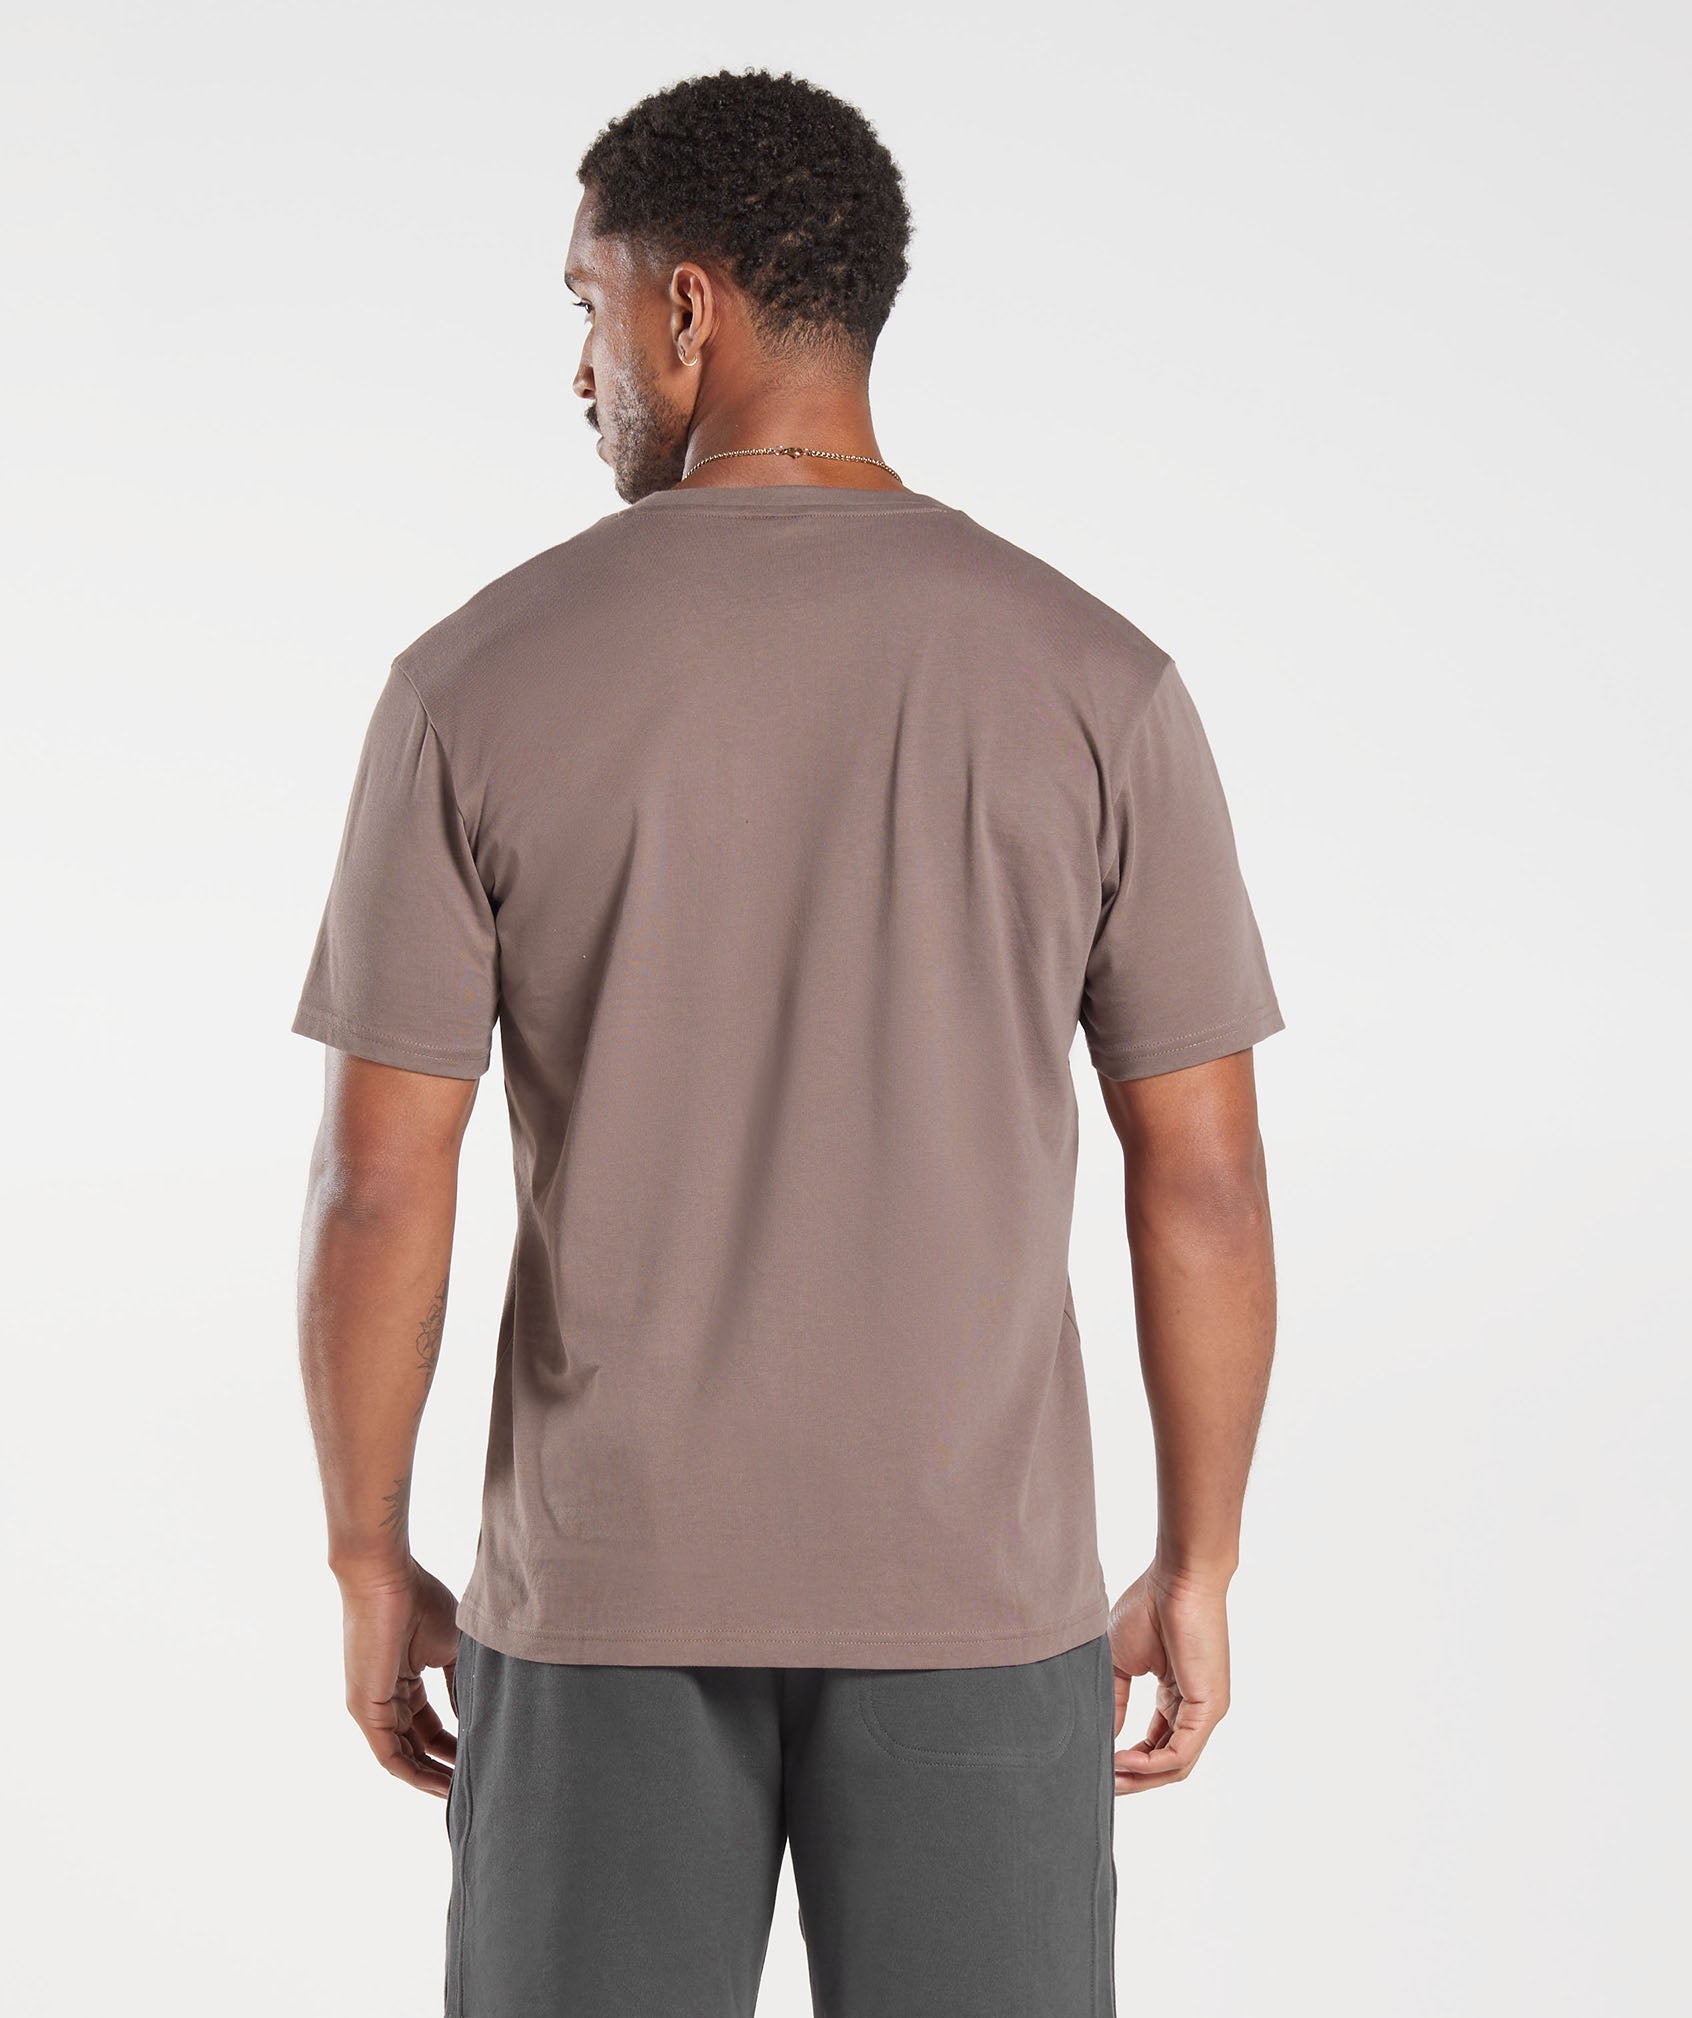 Crest T-Shirt in Truffle Brown